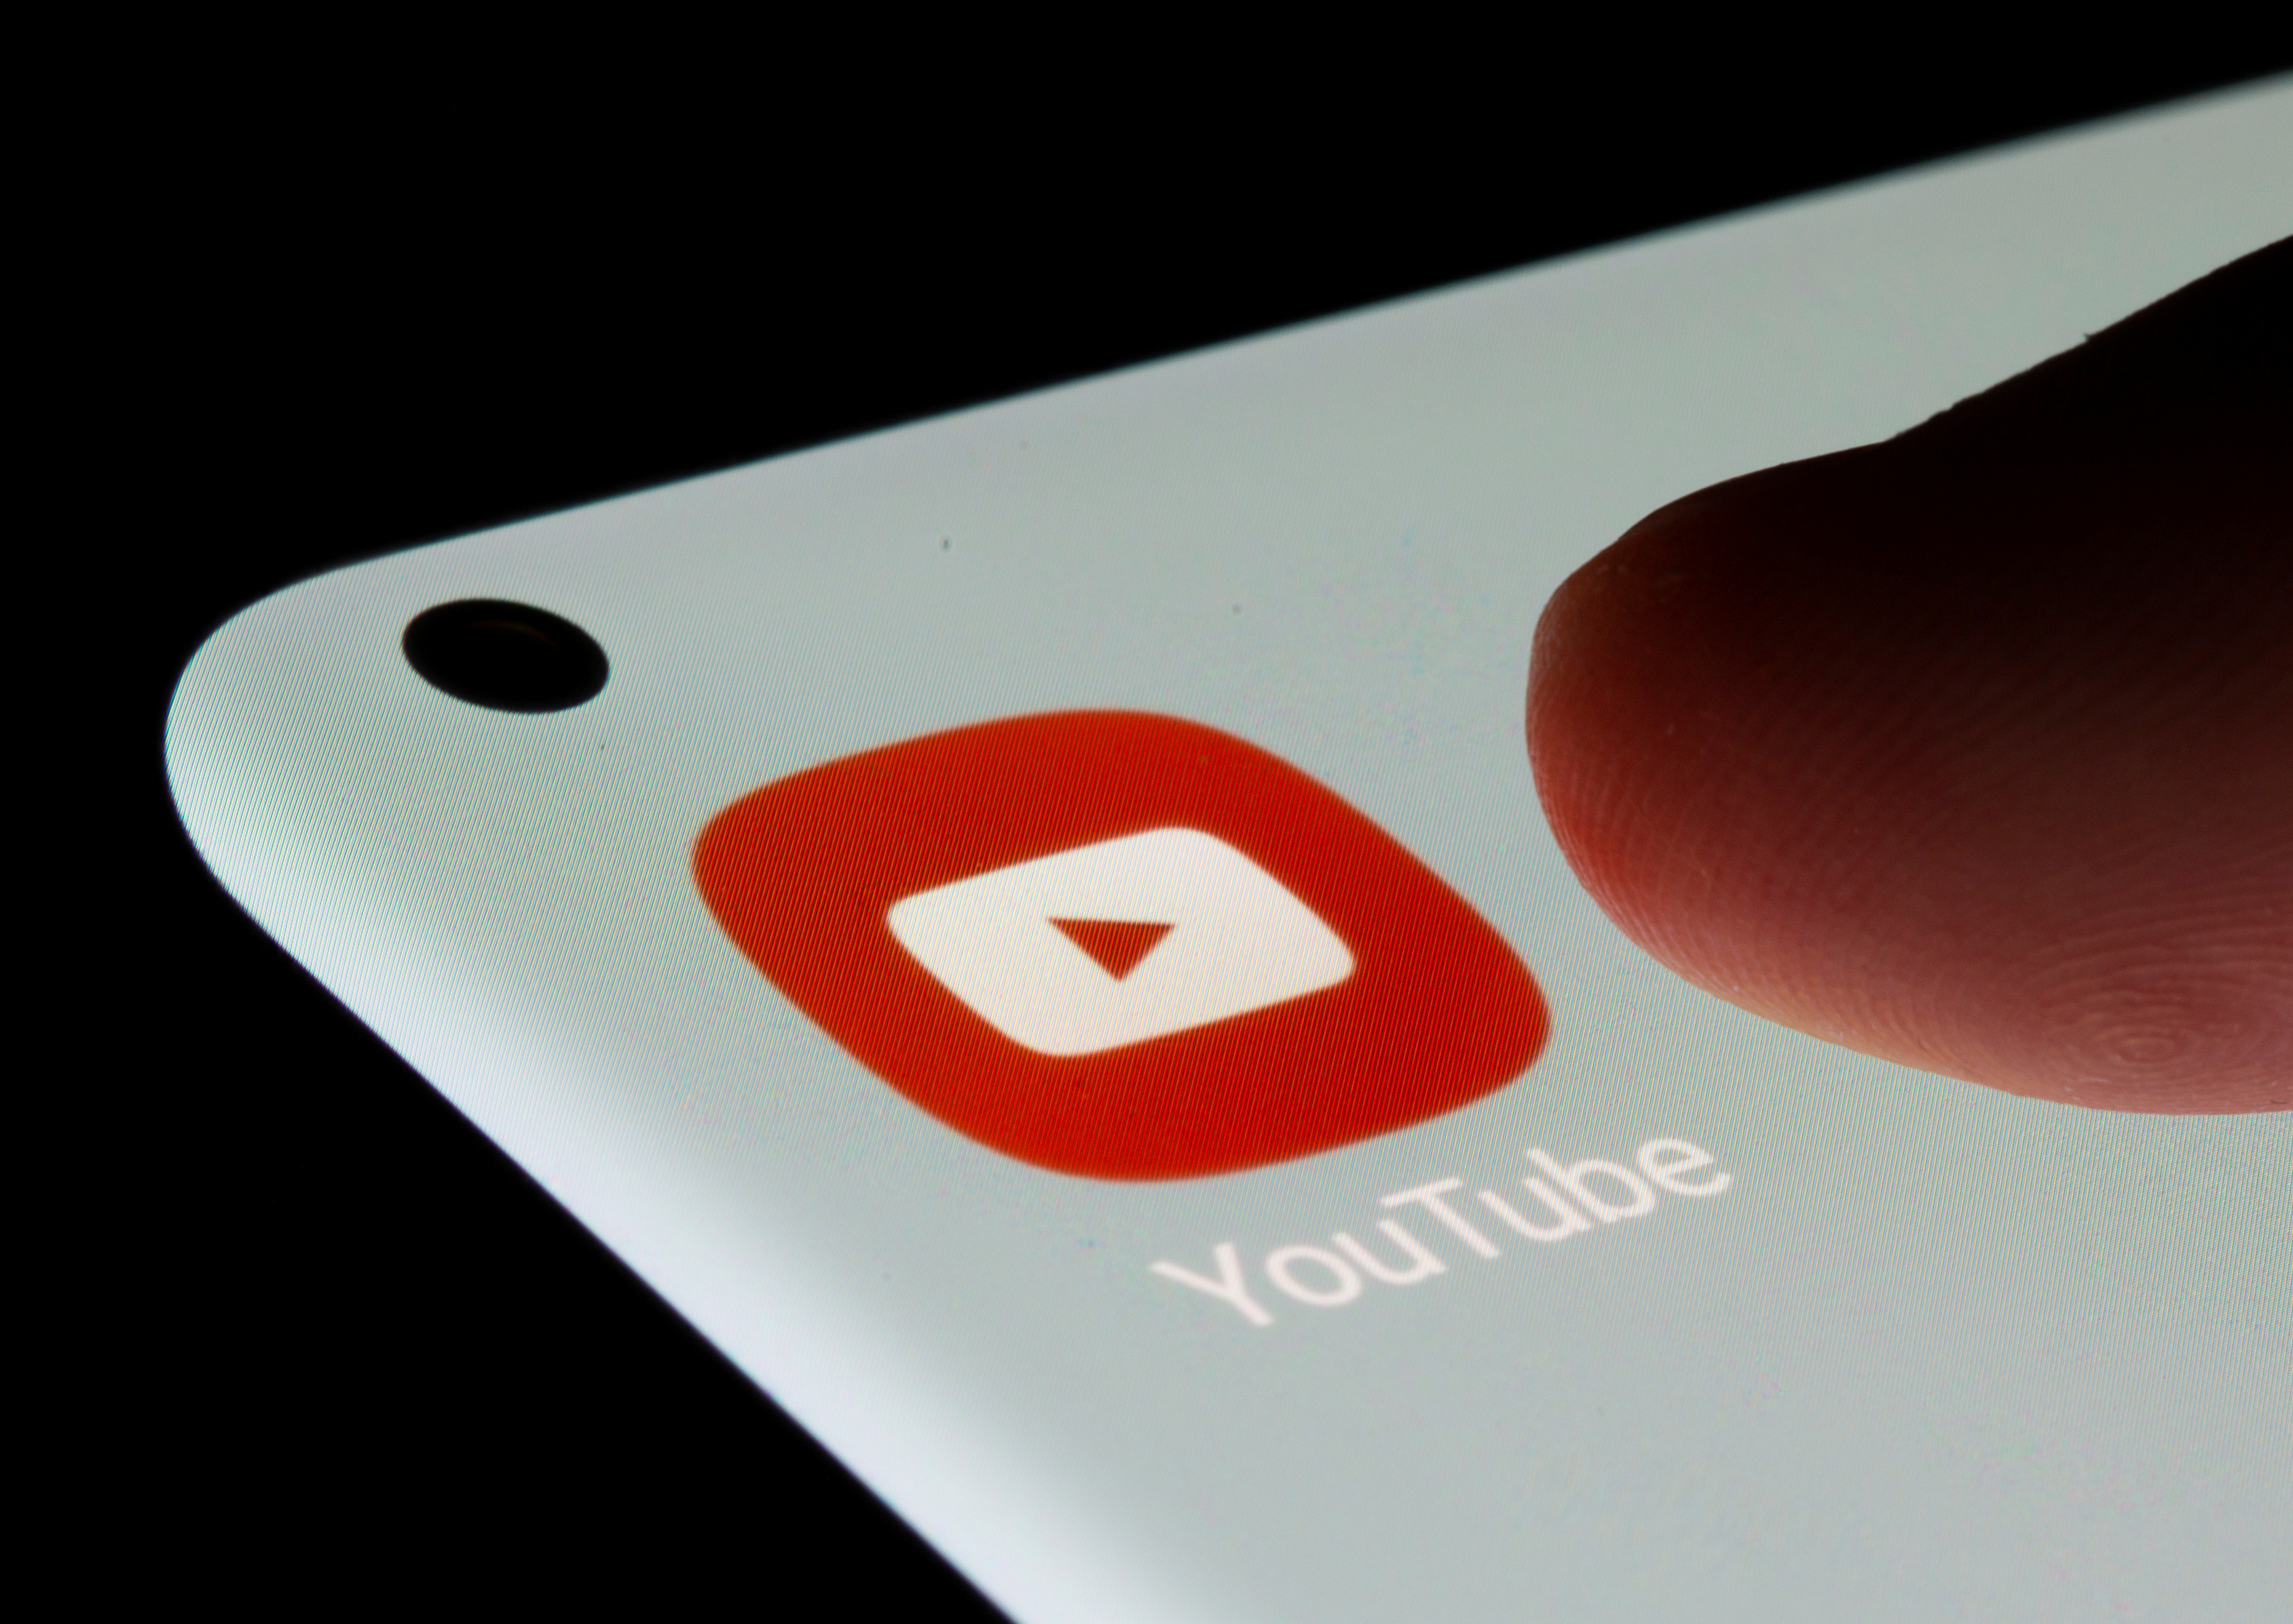 YouTube app is seen on a smartphone in this illustration